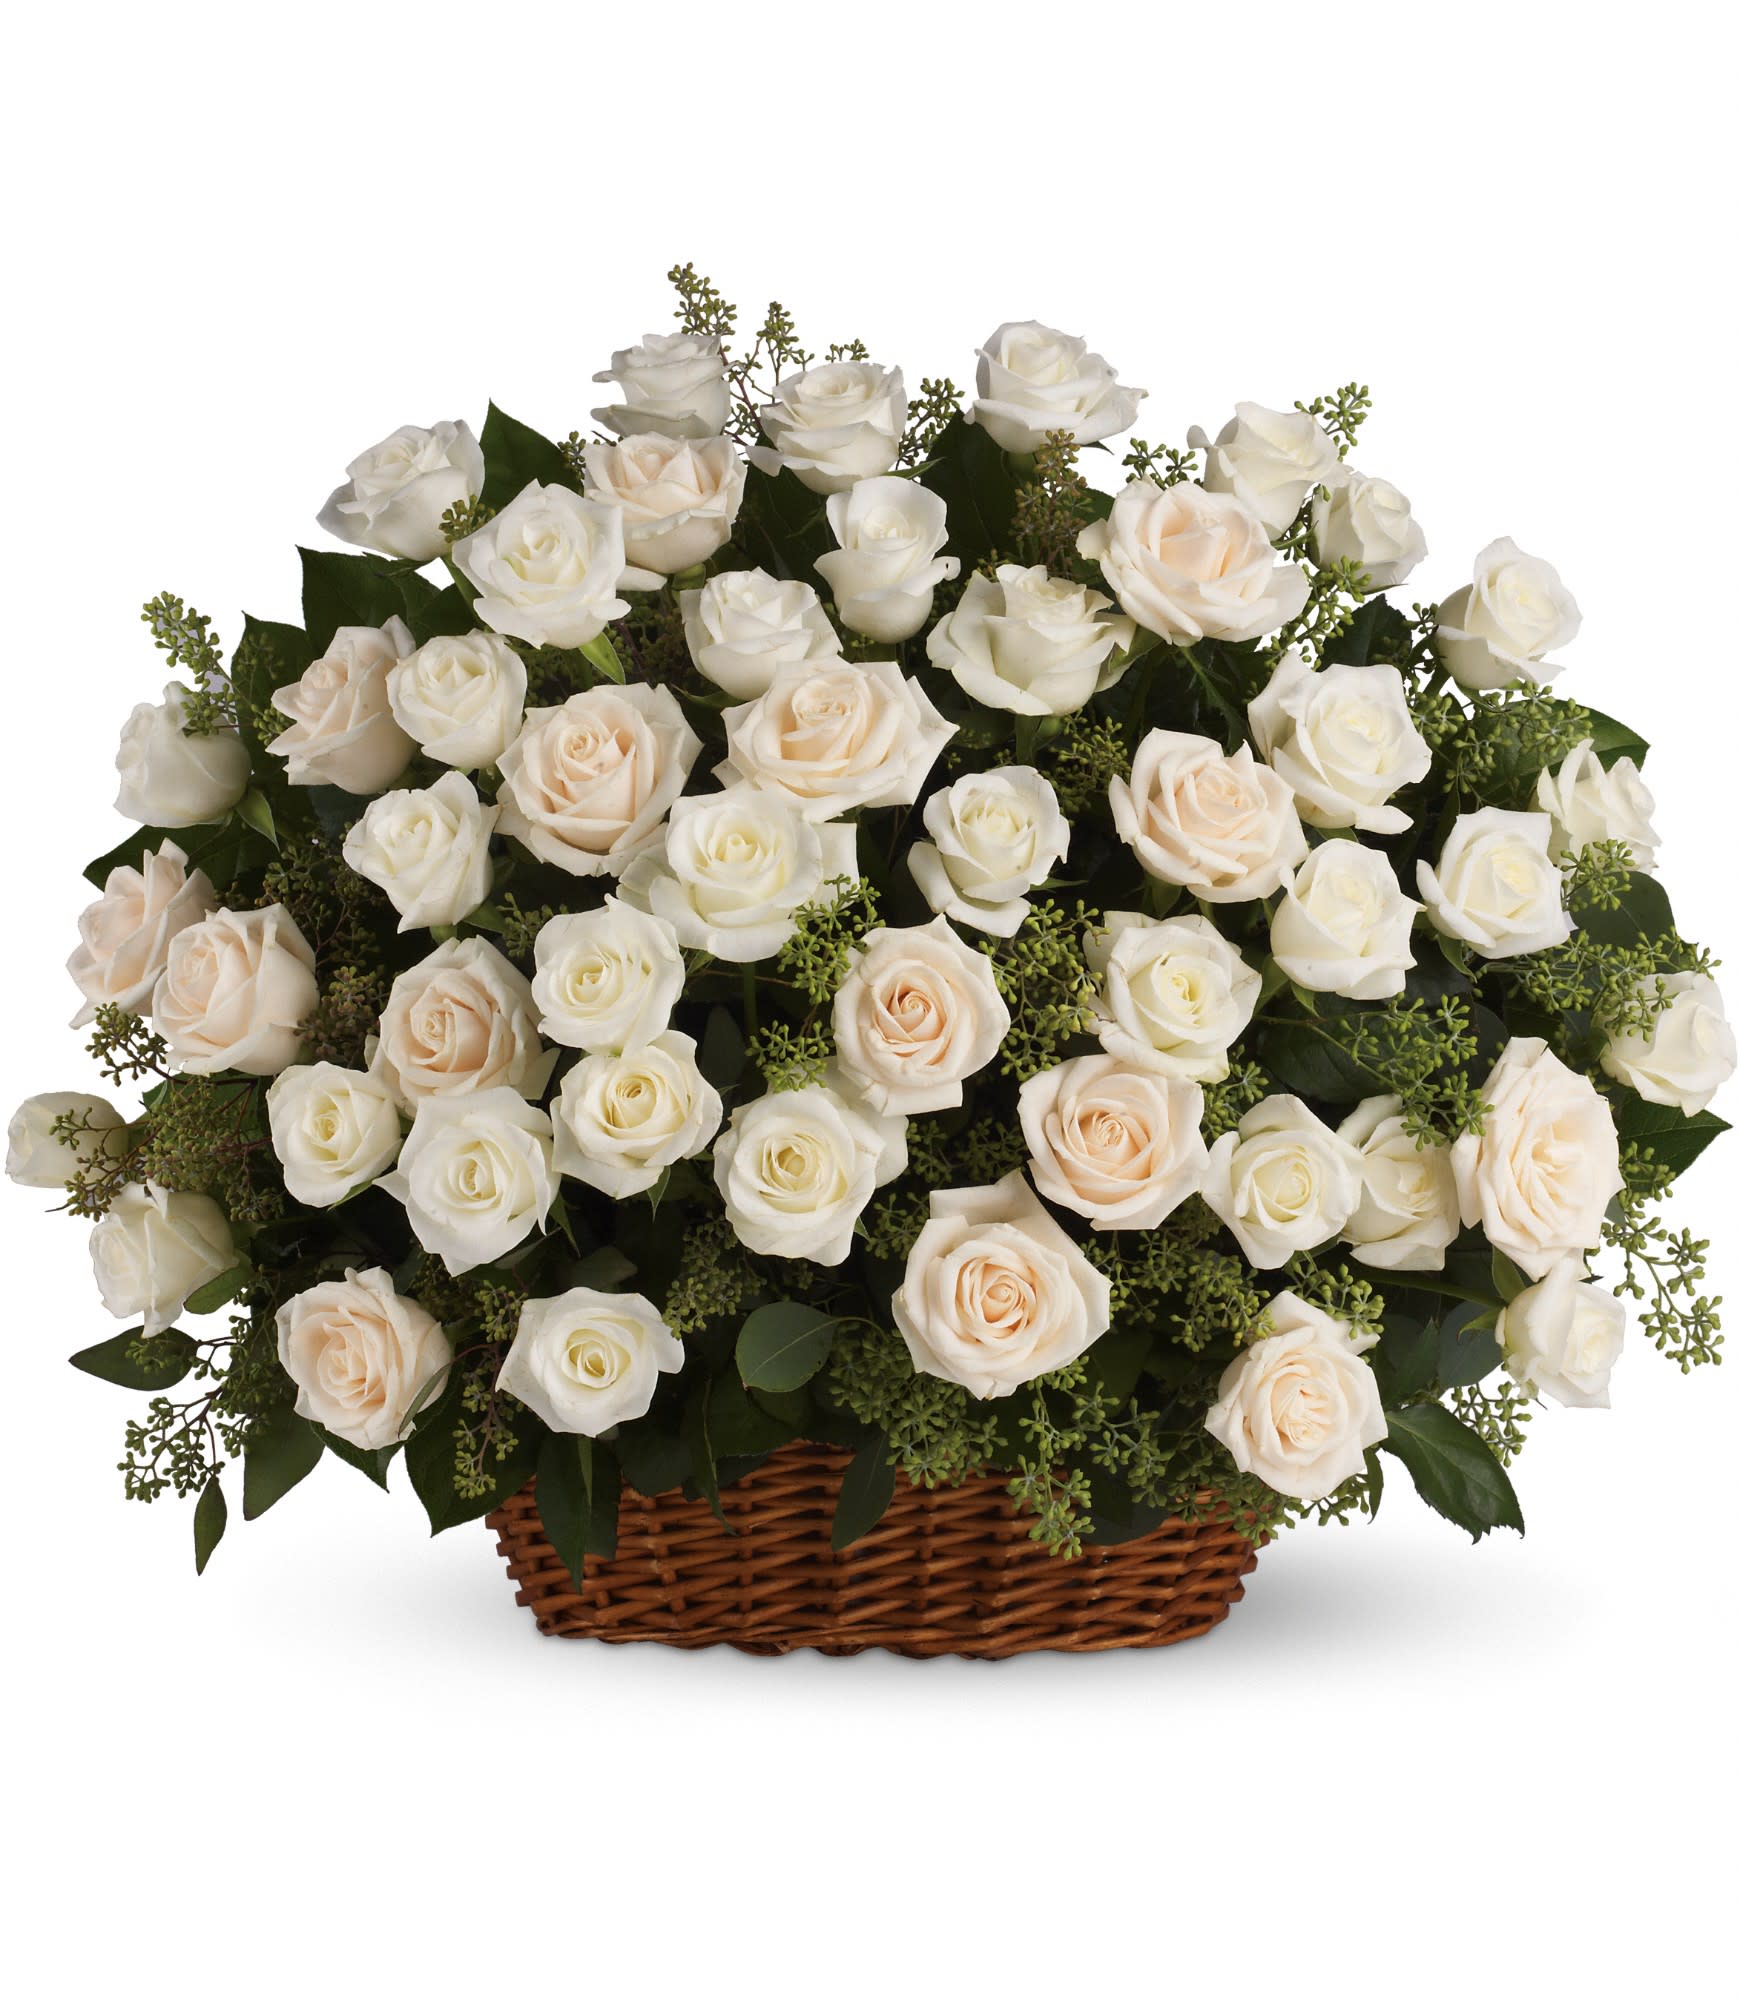 Bountiful Rose Basket - A beautiful, bountiful basket of luminous white roses that feels so fresh, natural, and welcomed in a home or at a service. T233-1A